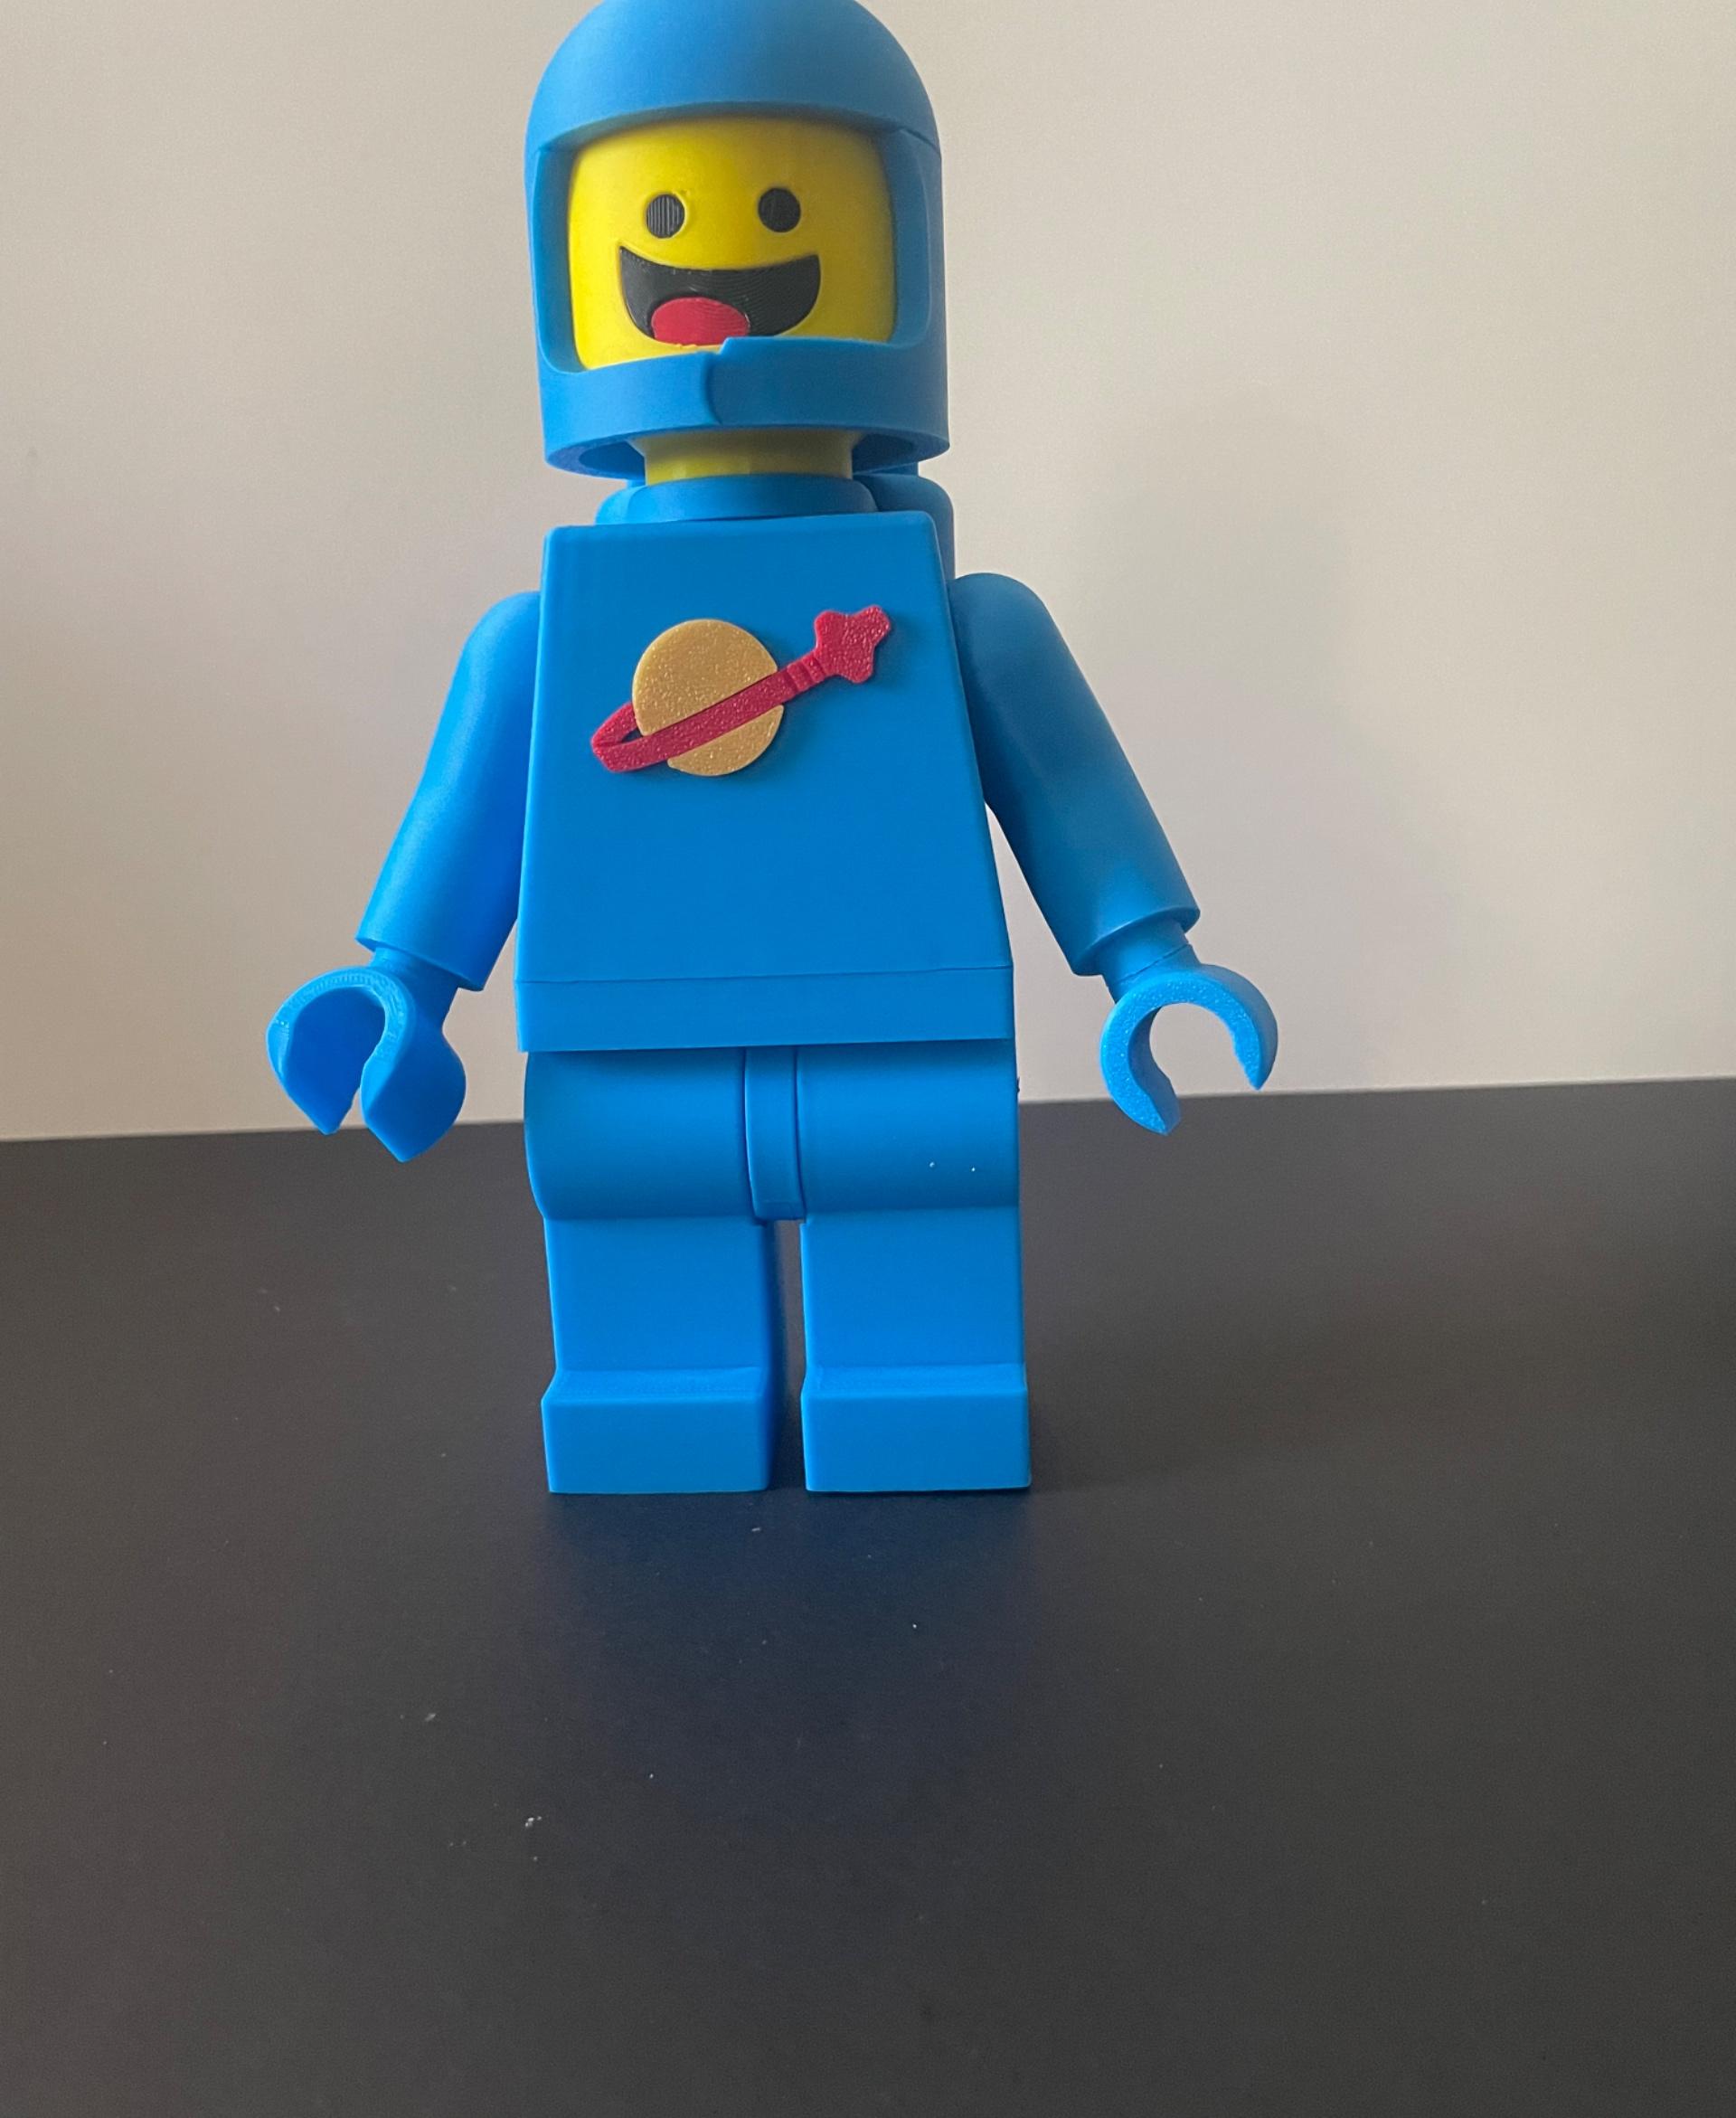 Benny's Head and Helmet (6:1 LEGO-inspired brick figure, NO MMU/AMS, NO supports, NO glue) - Spaceship! - 3d model